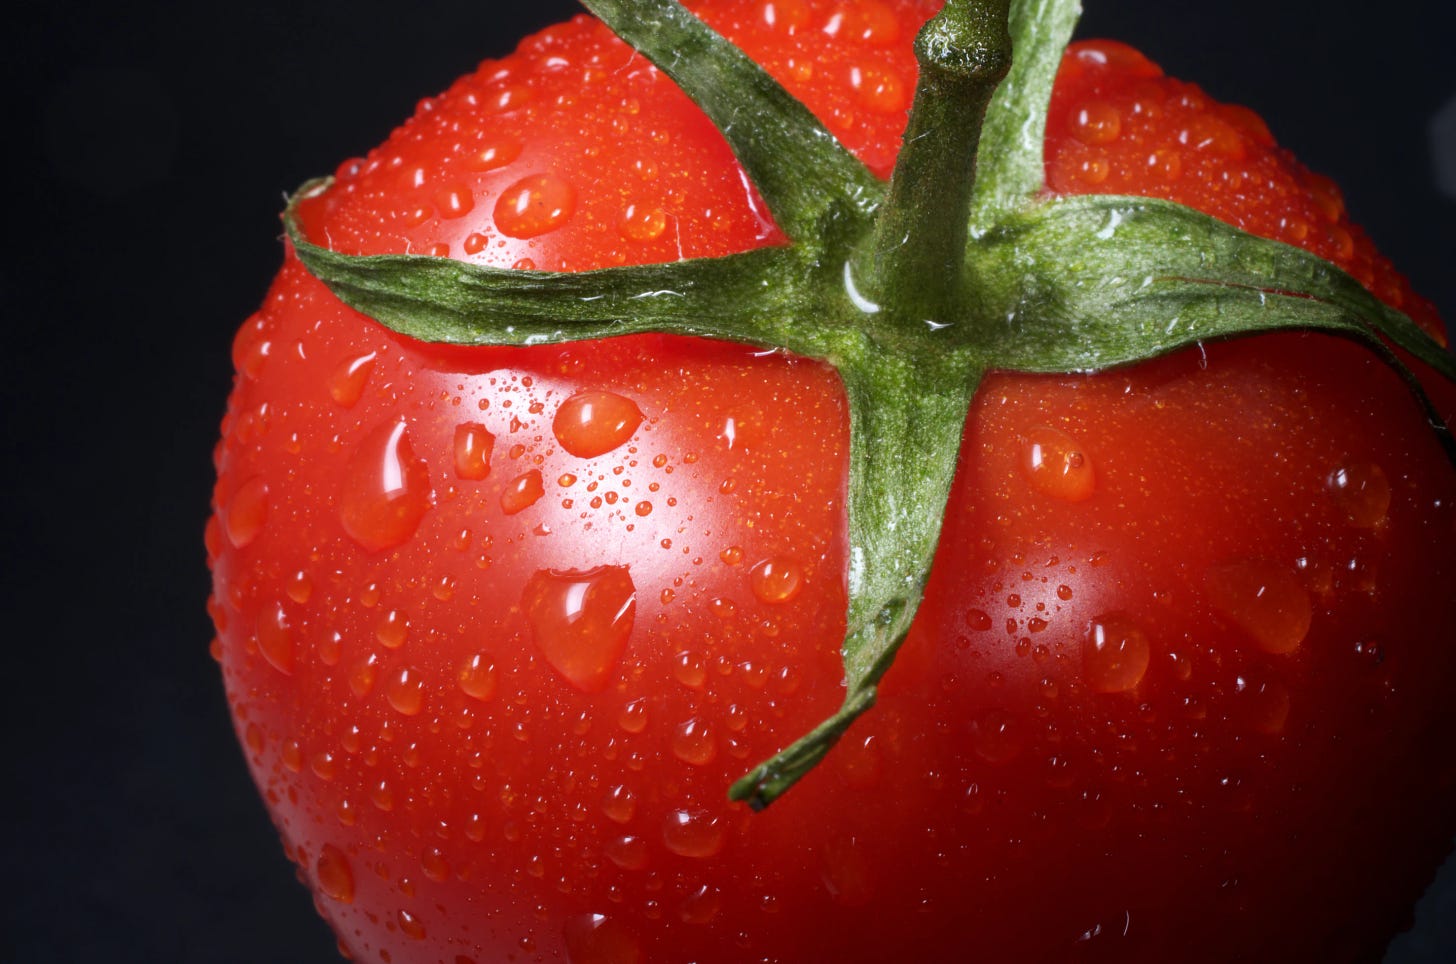 A tomato with water droplets on the skin, ready for a bite